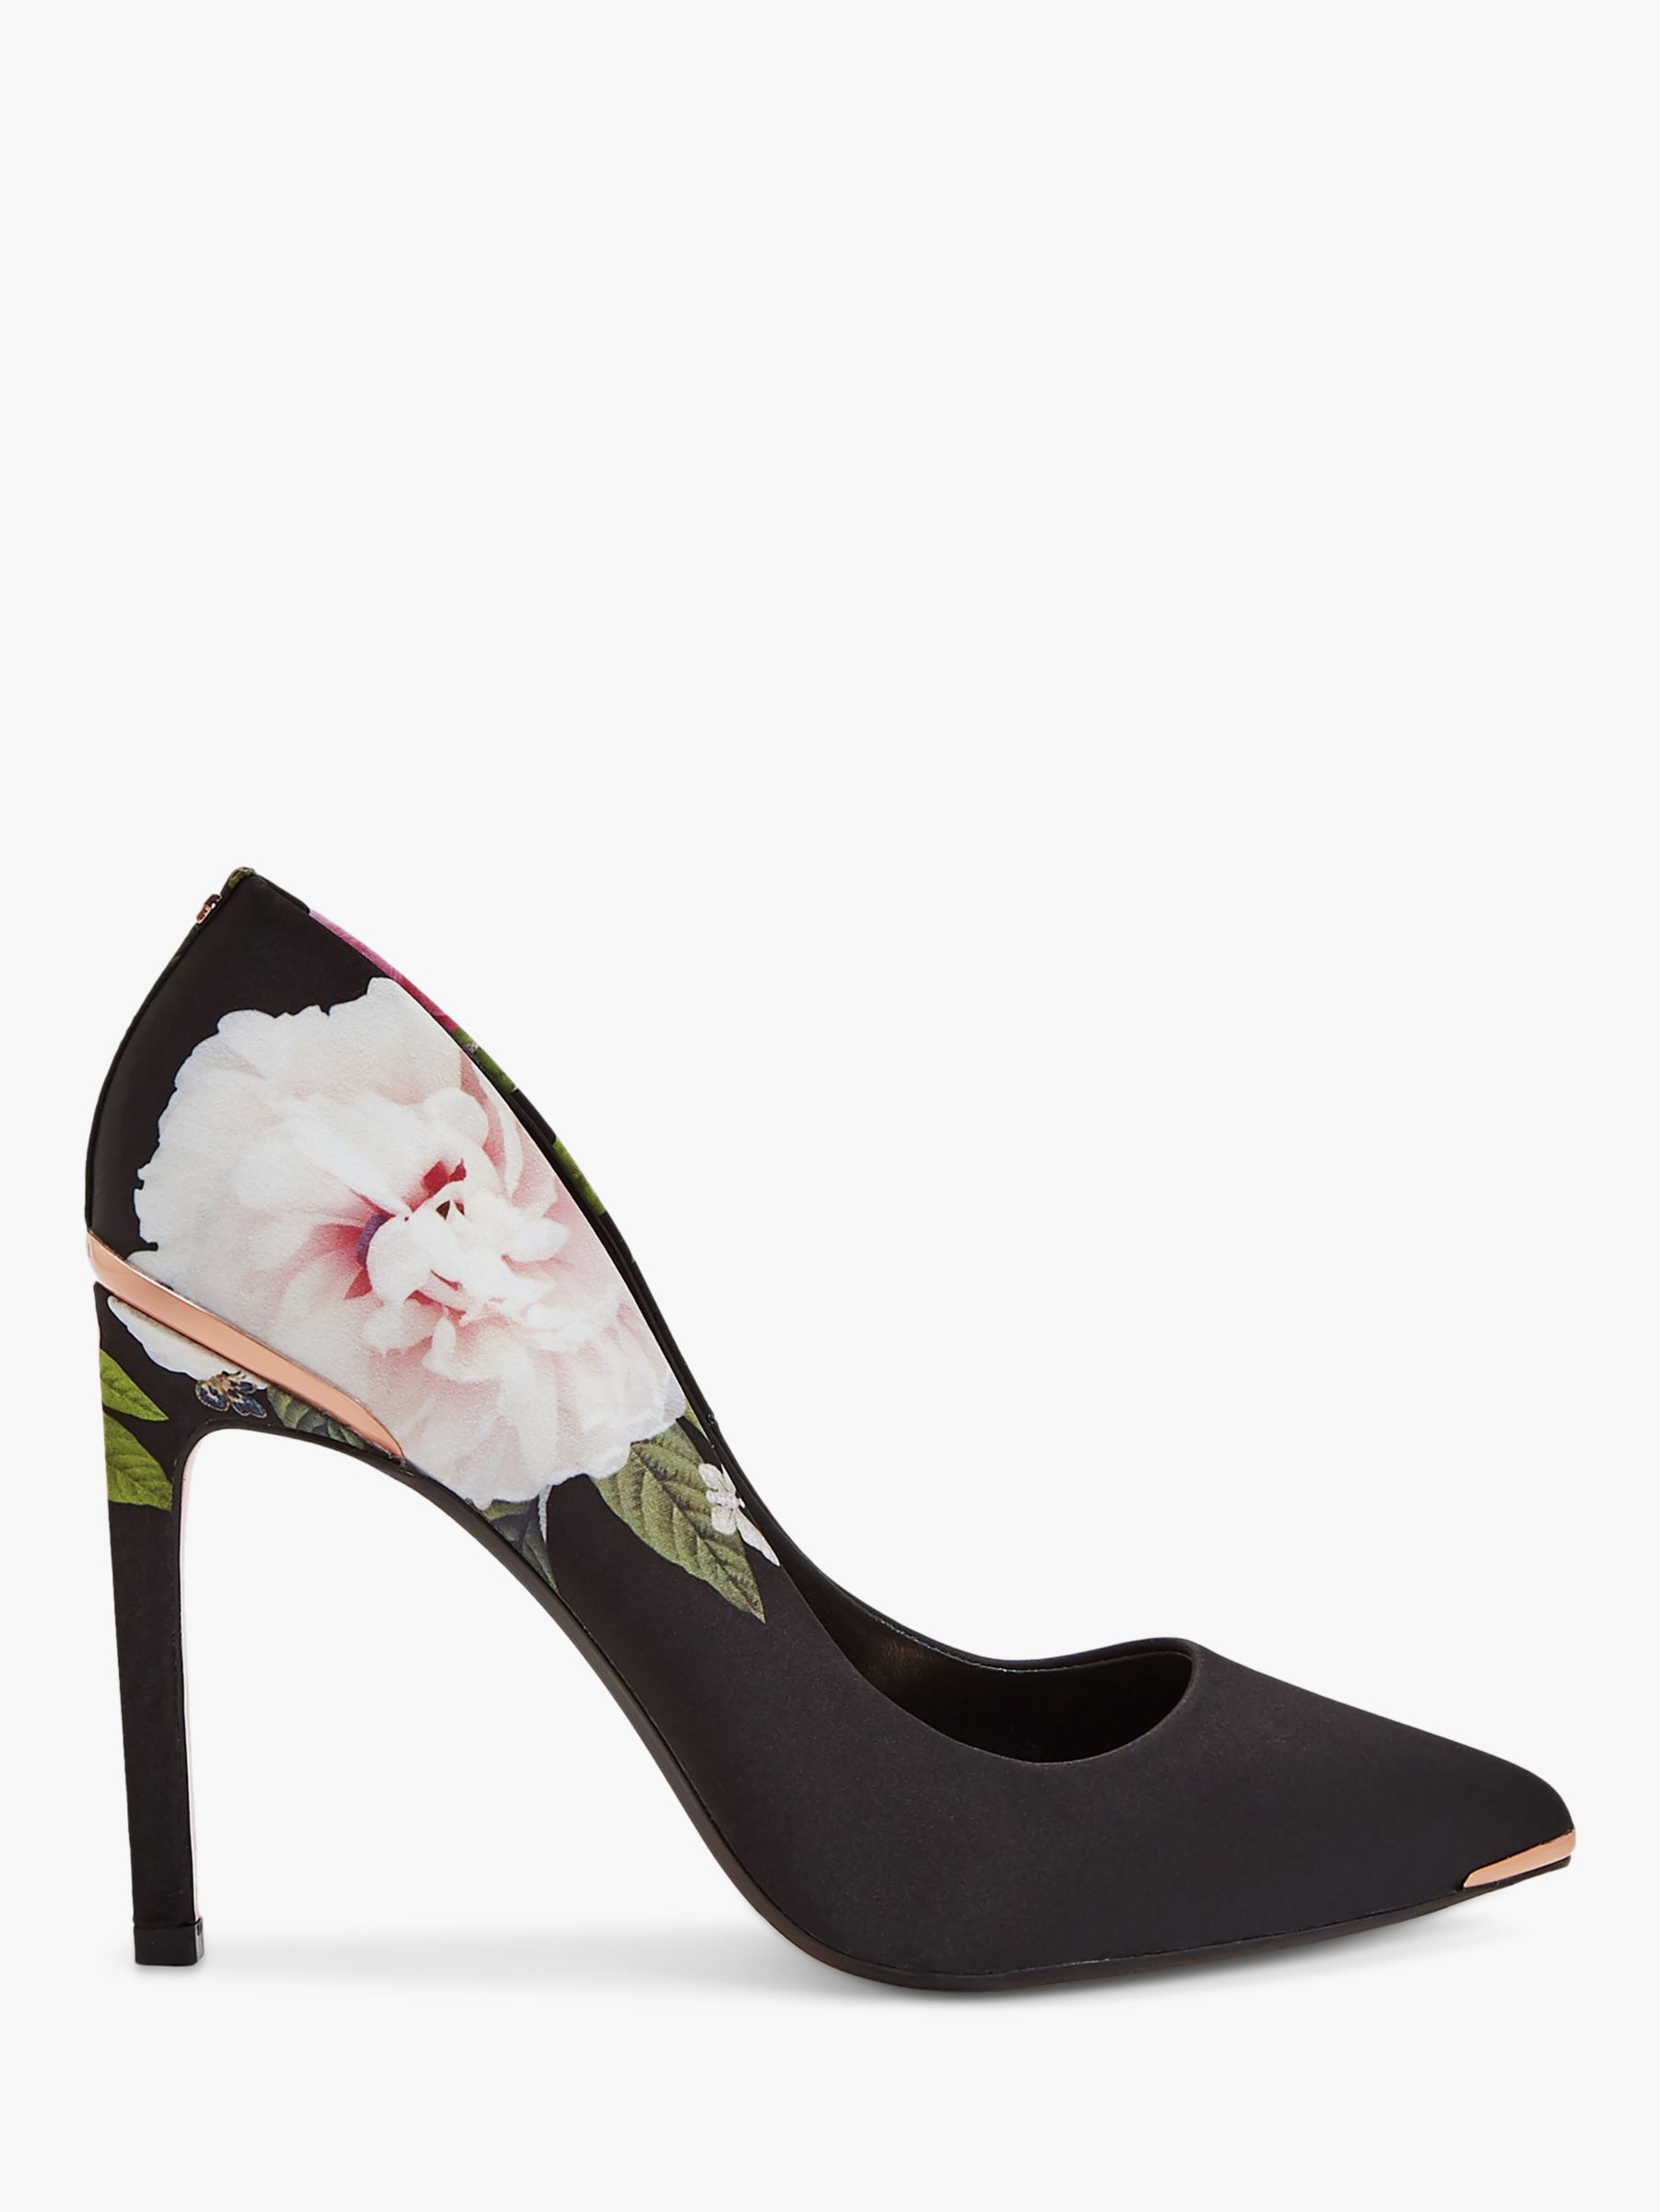 ted baker shoes sale ladies